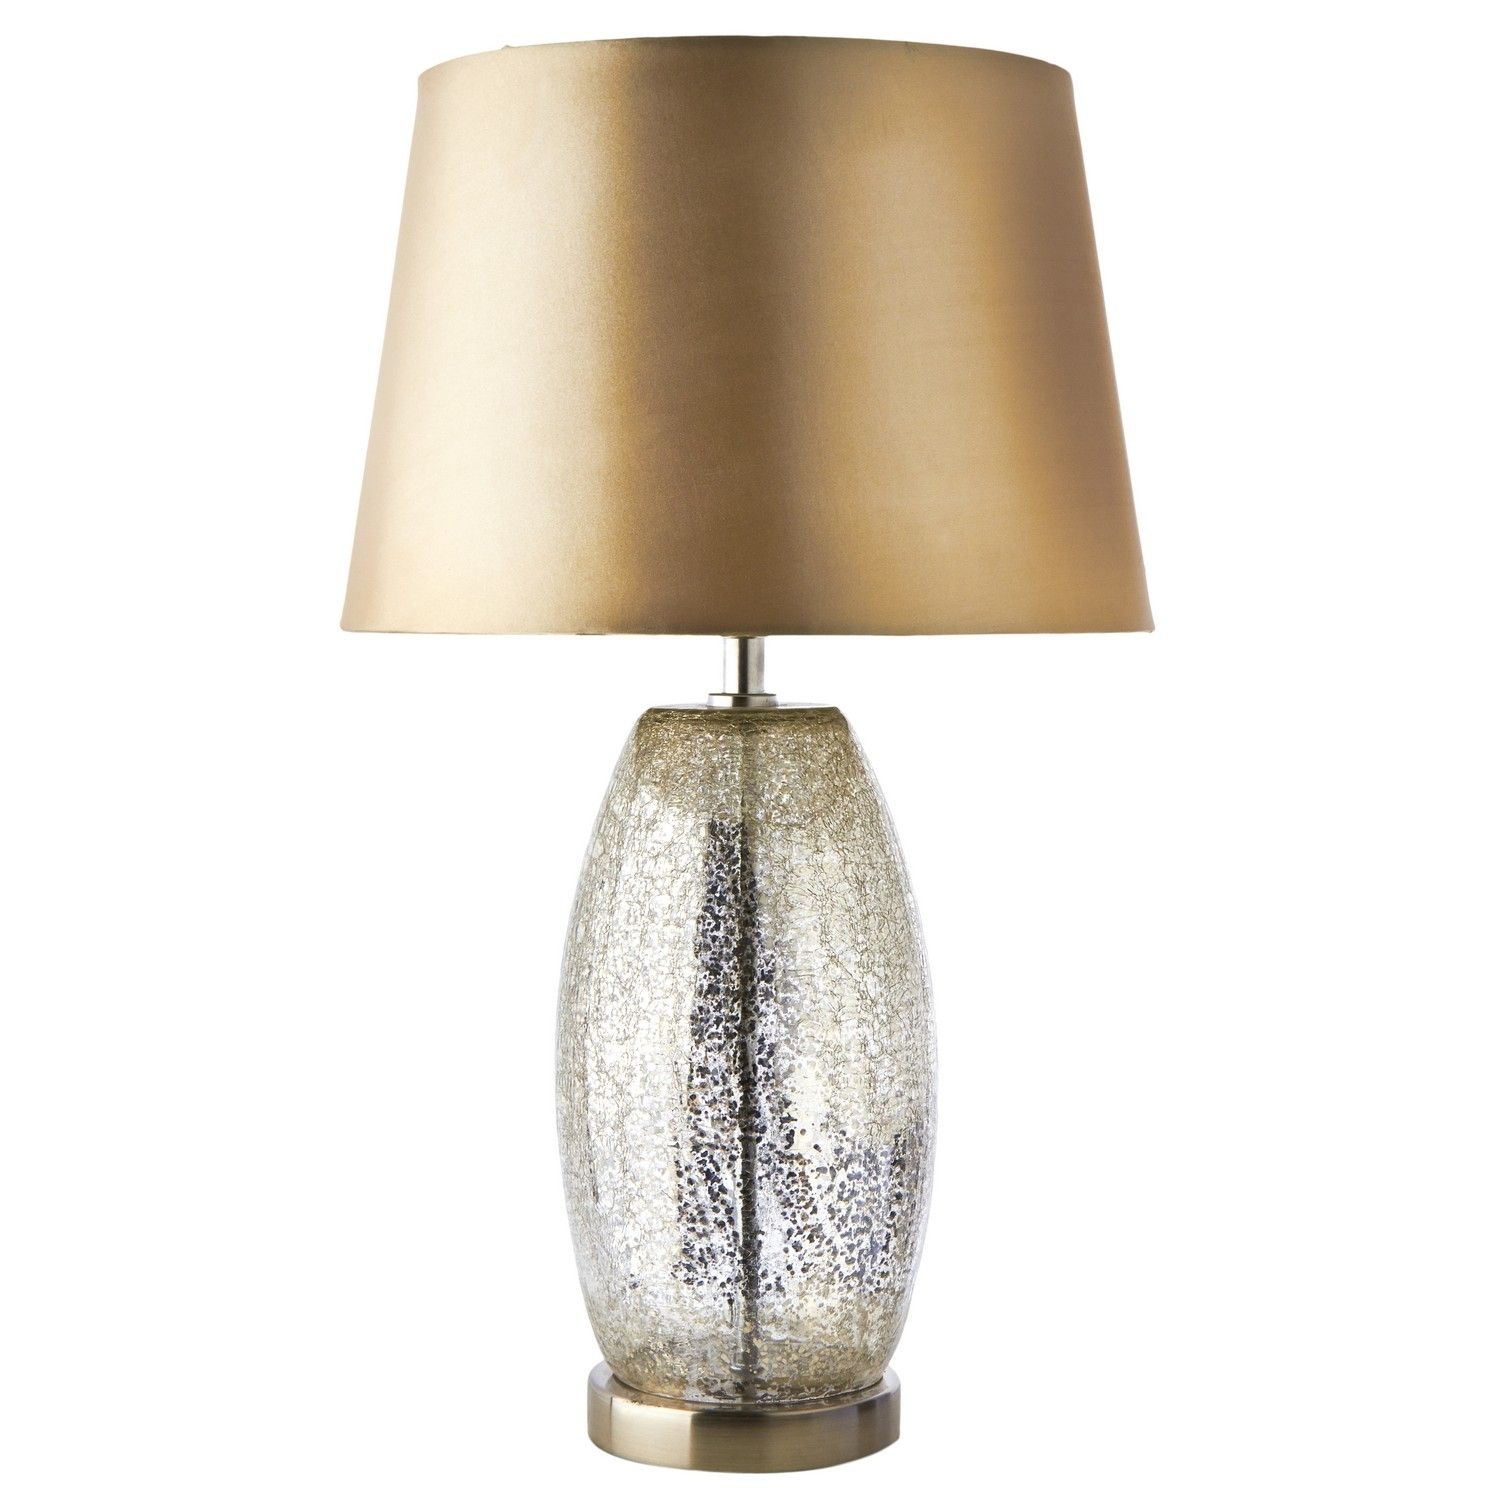 Crackle glass table lamp 21